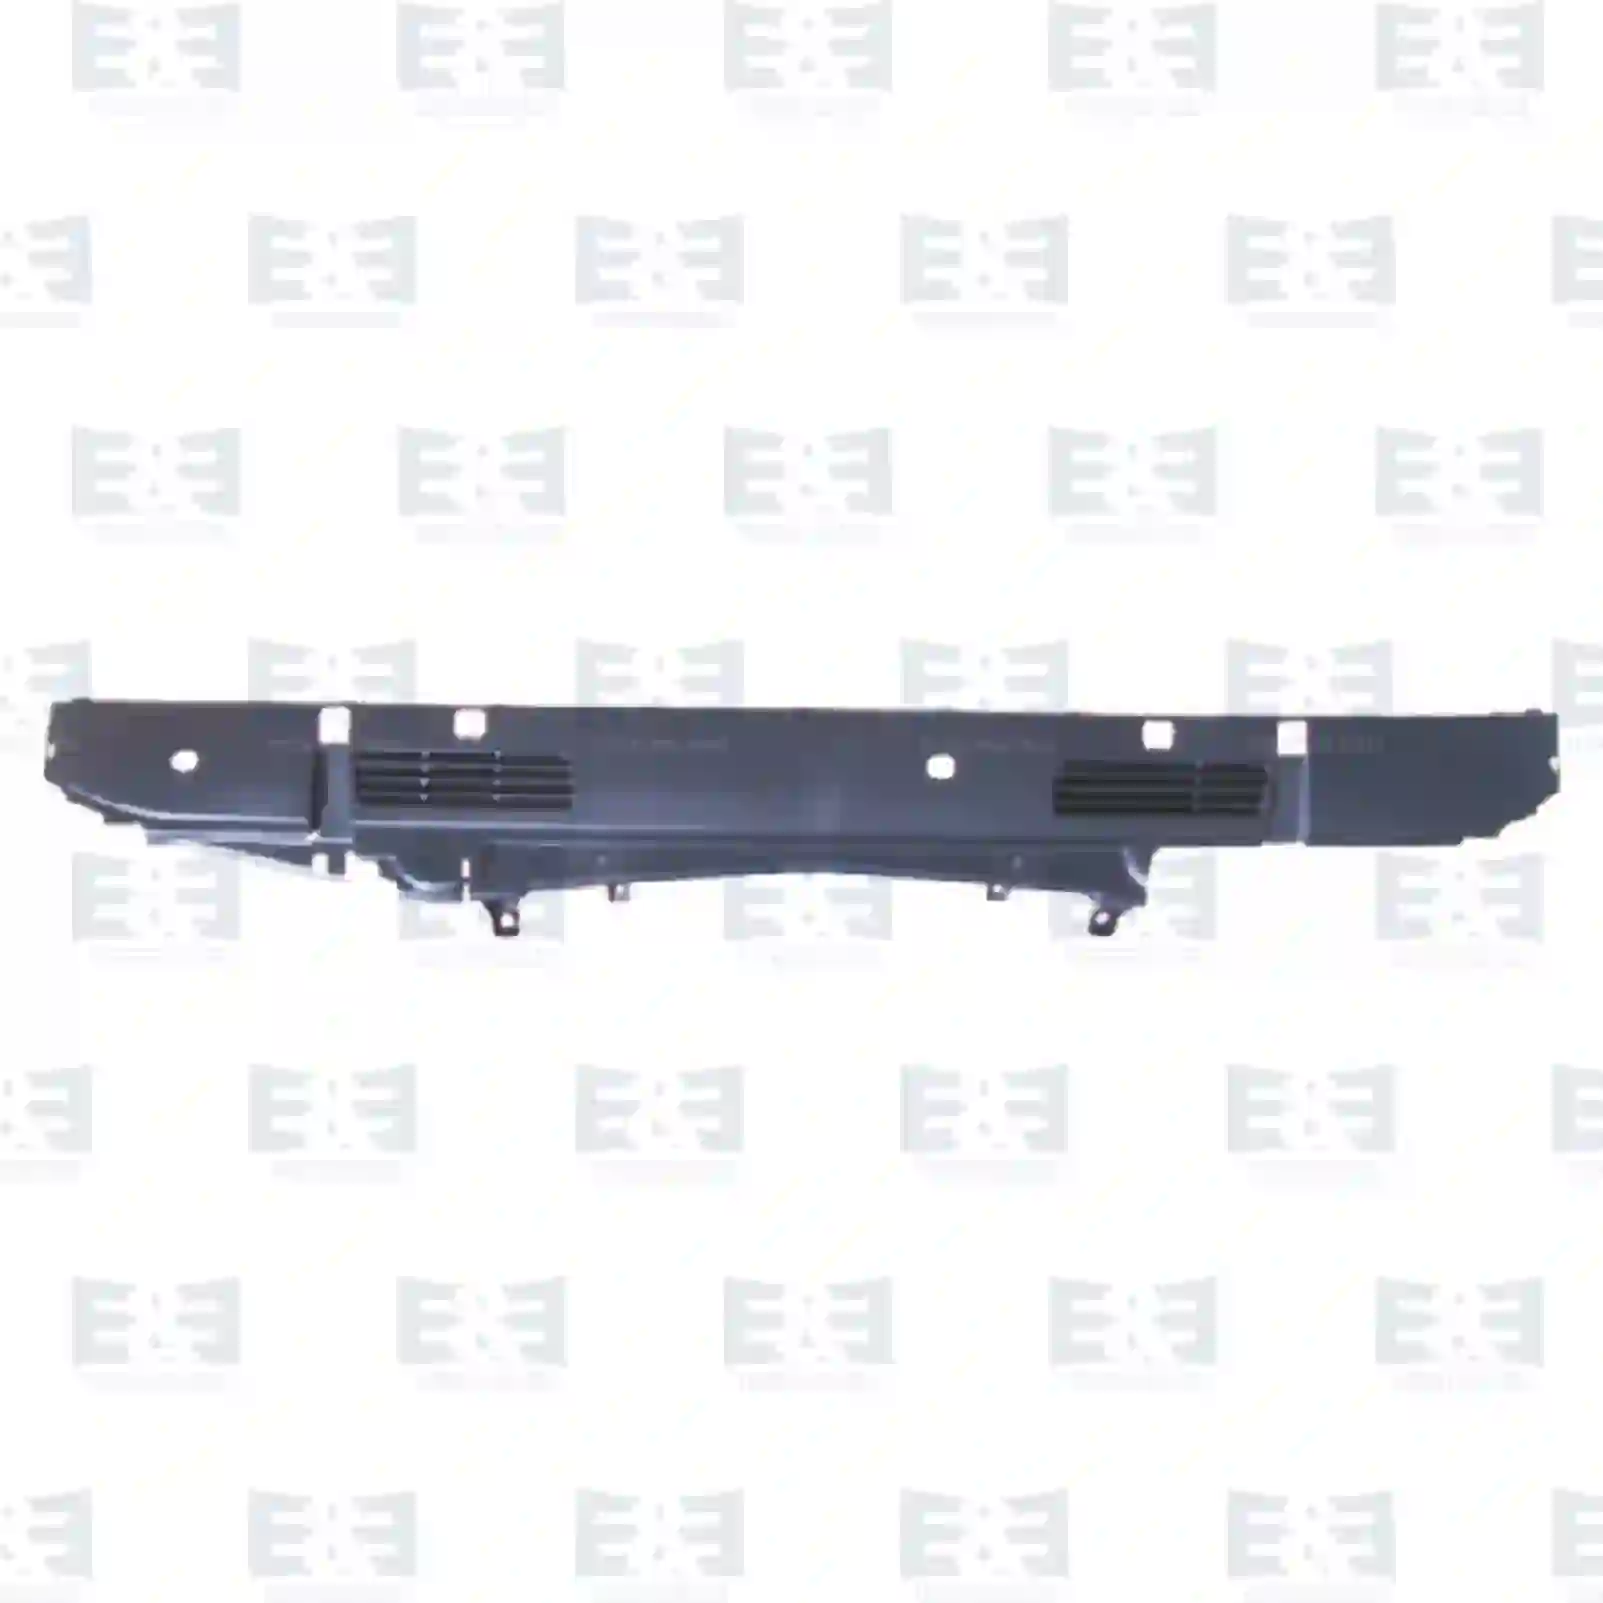 Front panel, without sealing stripes and adhesive dots, 2E2289051, 20527277, 20586693, 20769628, 3175363 ||  2E2289051 E&E Truck Spare Parts | Truck Spare Parts, Auotomotive Spare Parts Front panel, without sealing stripes and adhesive dots, 2E2289051, 20527277, 20586693, 20769628, 3175363 ||  2E2289051 E&E Truck Spare Parts | Truck Spare Parts, Auotomotive Spare Parts